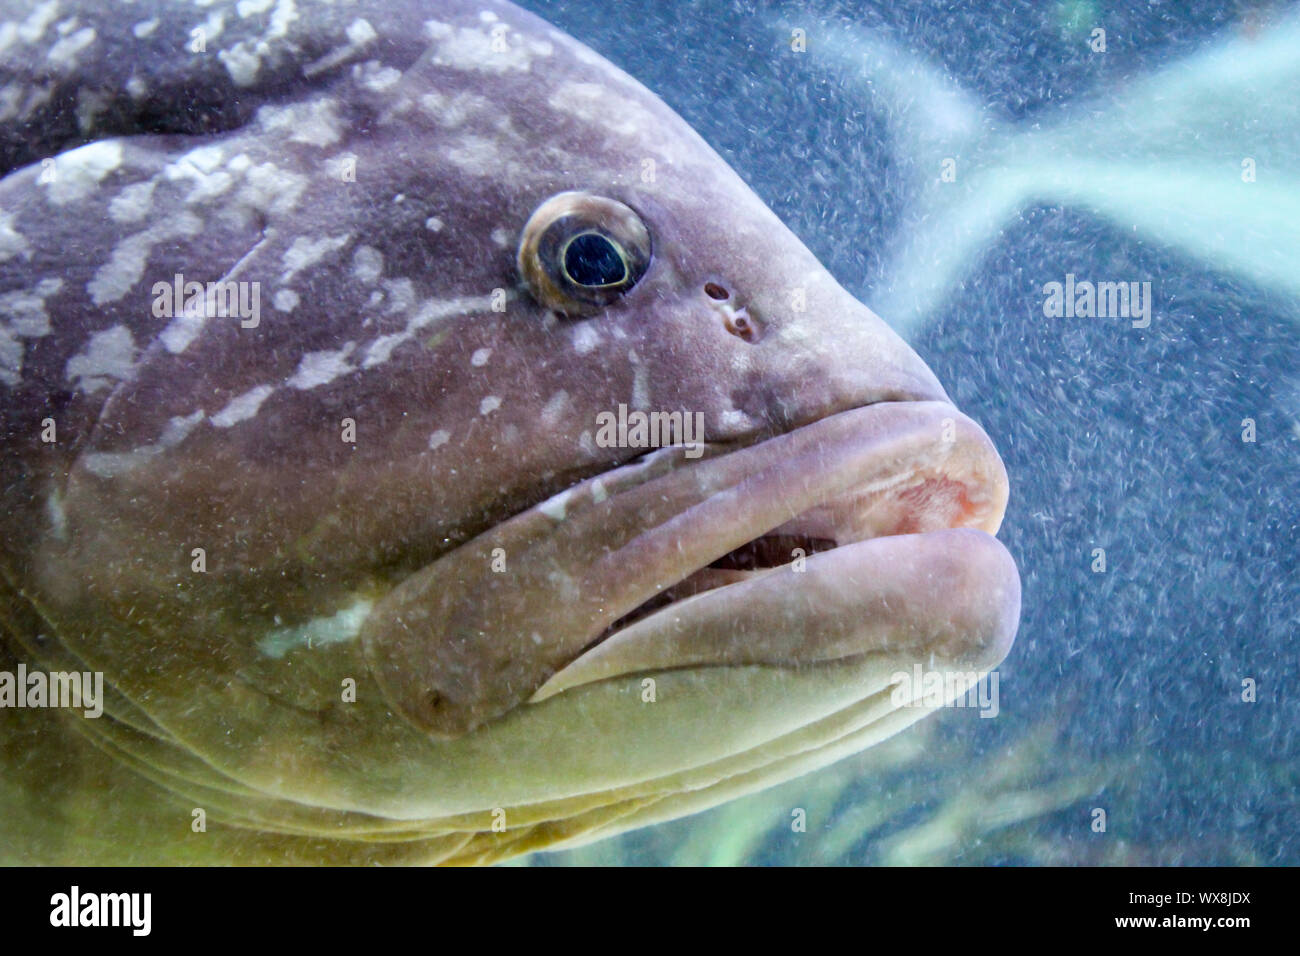 Close up of a fish Stock Photo